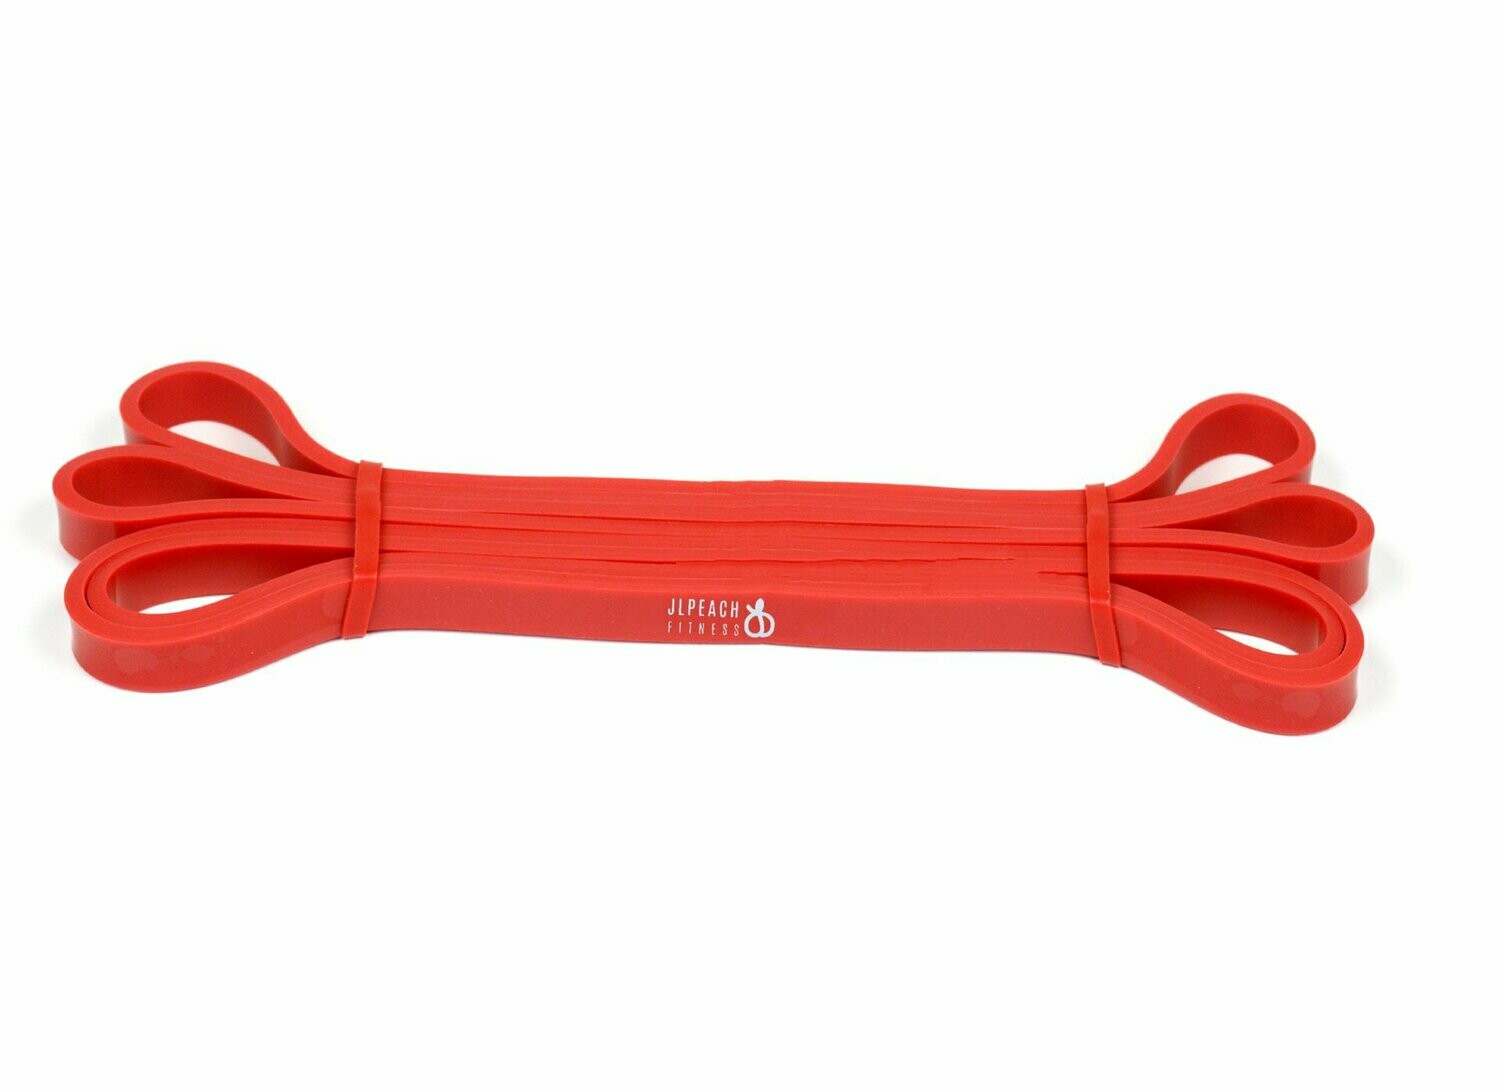 Red Long Resistance band